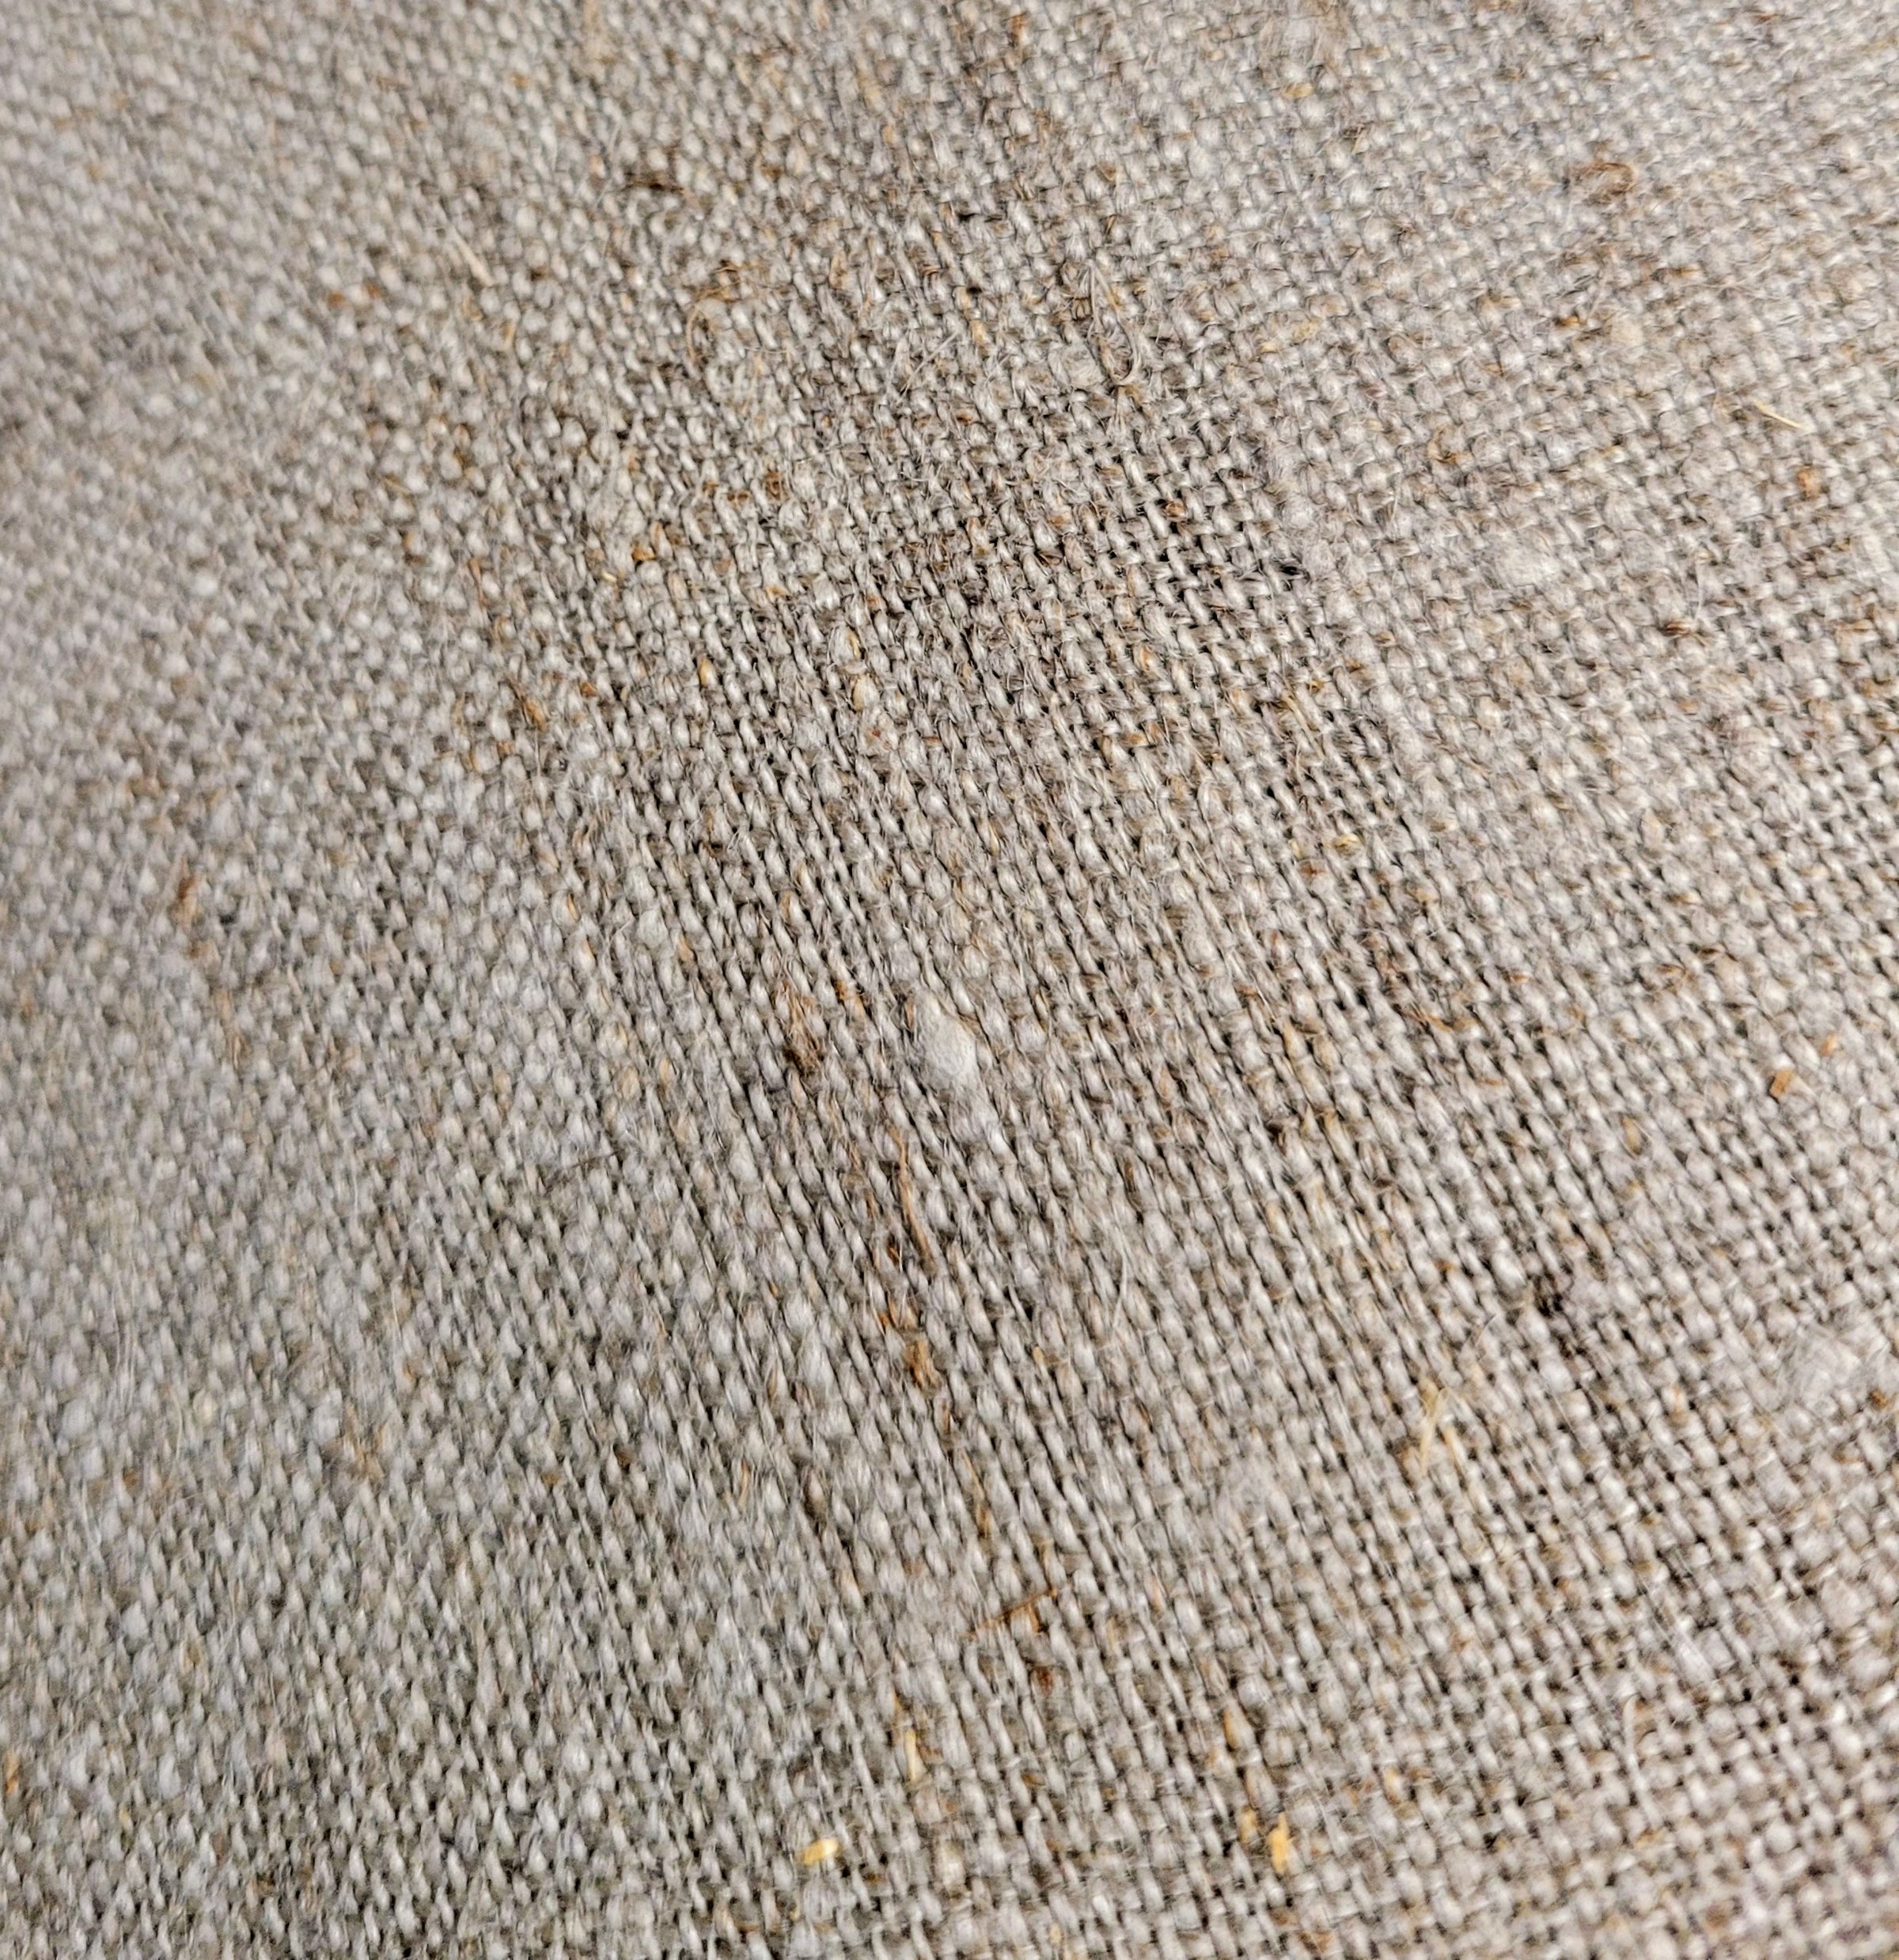 Washed Linen Fabric, Natural Flax Color